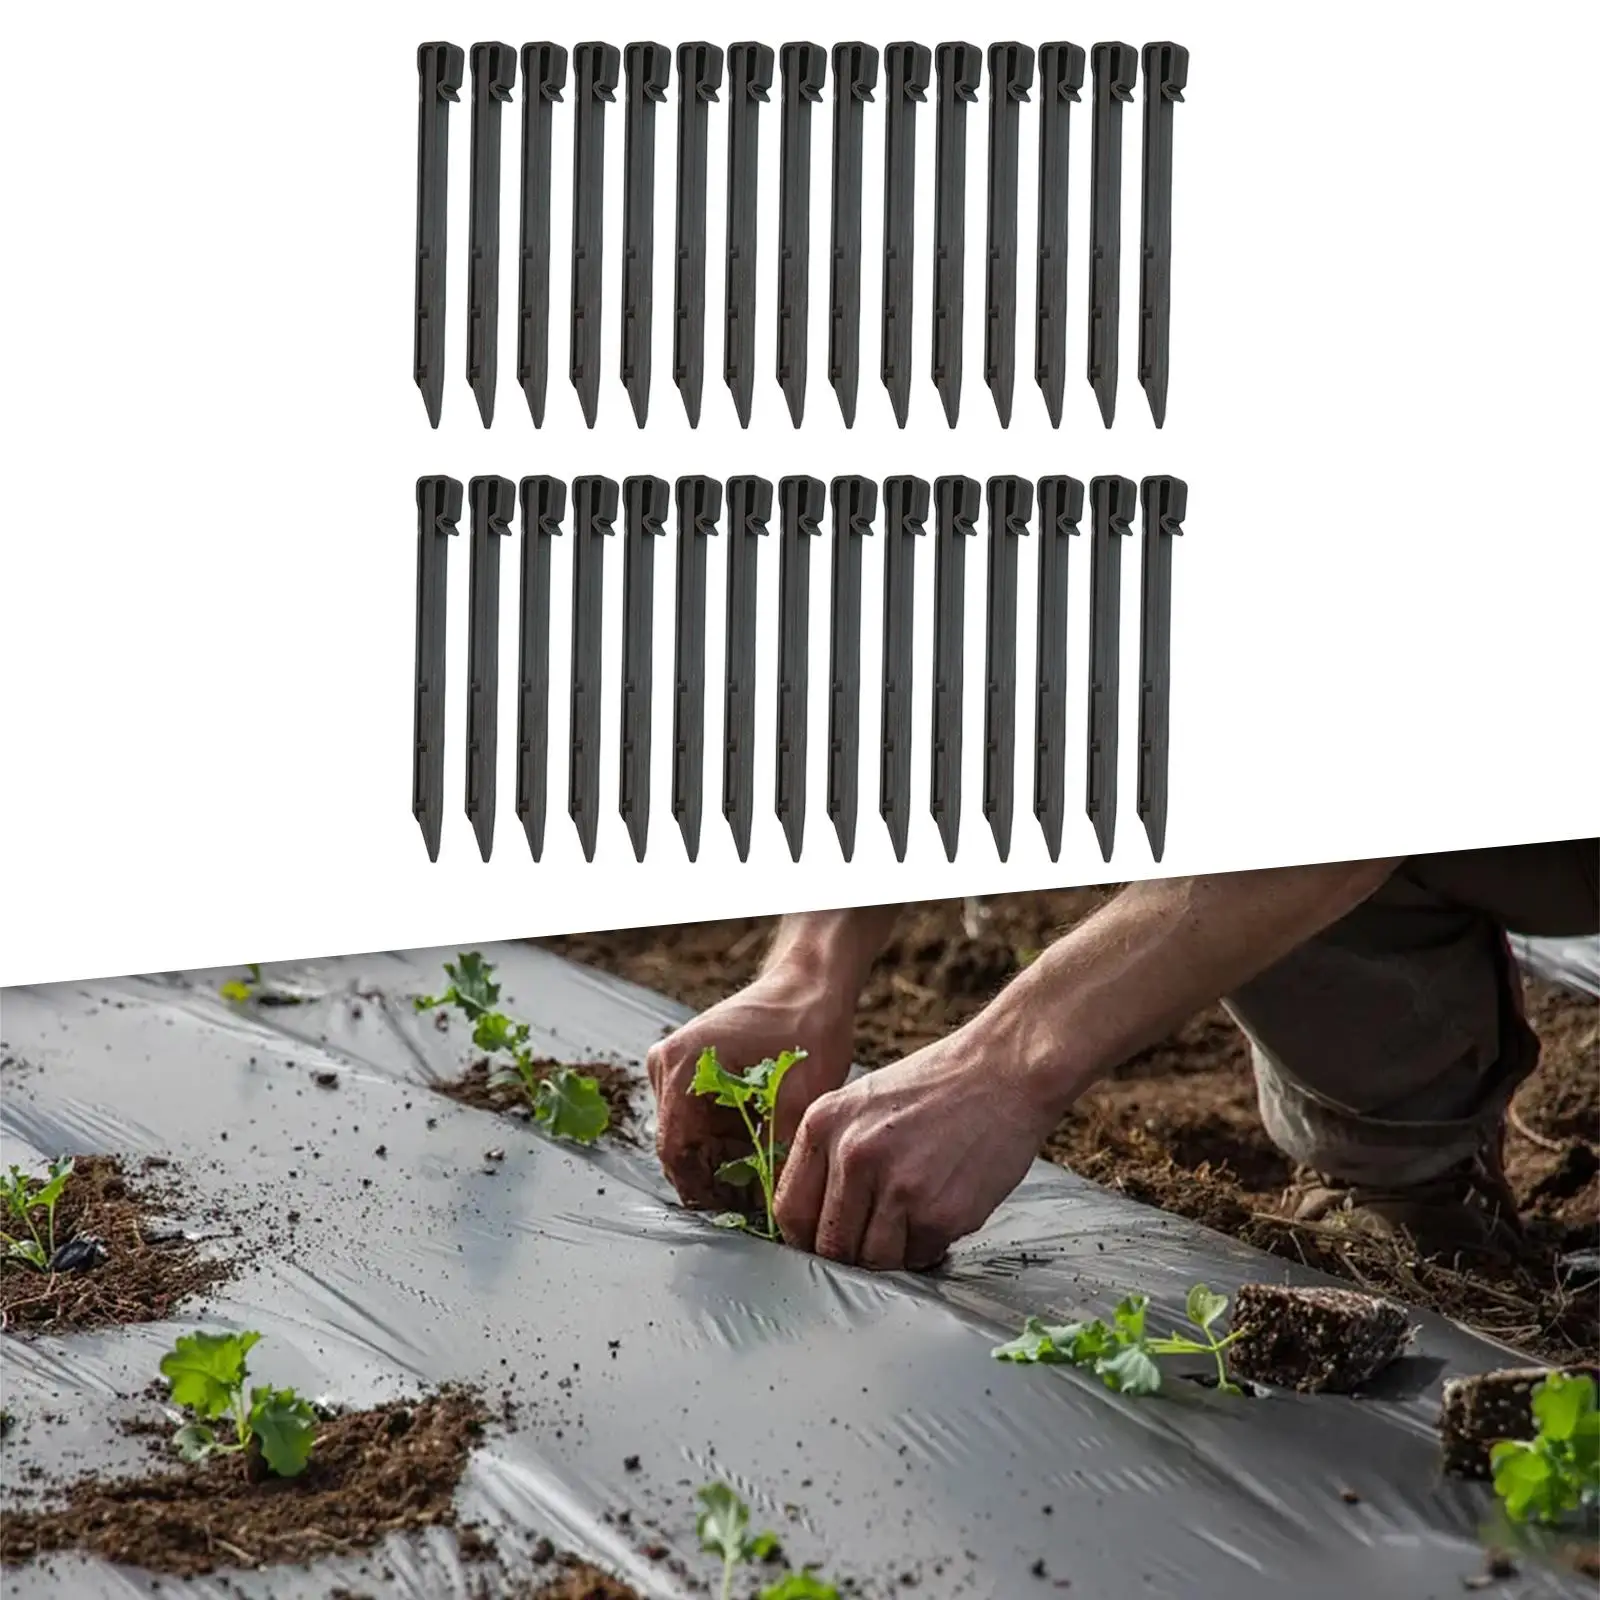 30x Garden Staples Heavy Duty Fruit Tree Branch Spreader Stakes Ground Stakes Garden Nettings Pegs for Hiking Outdoor Camping